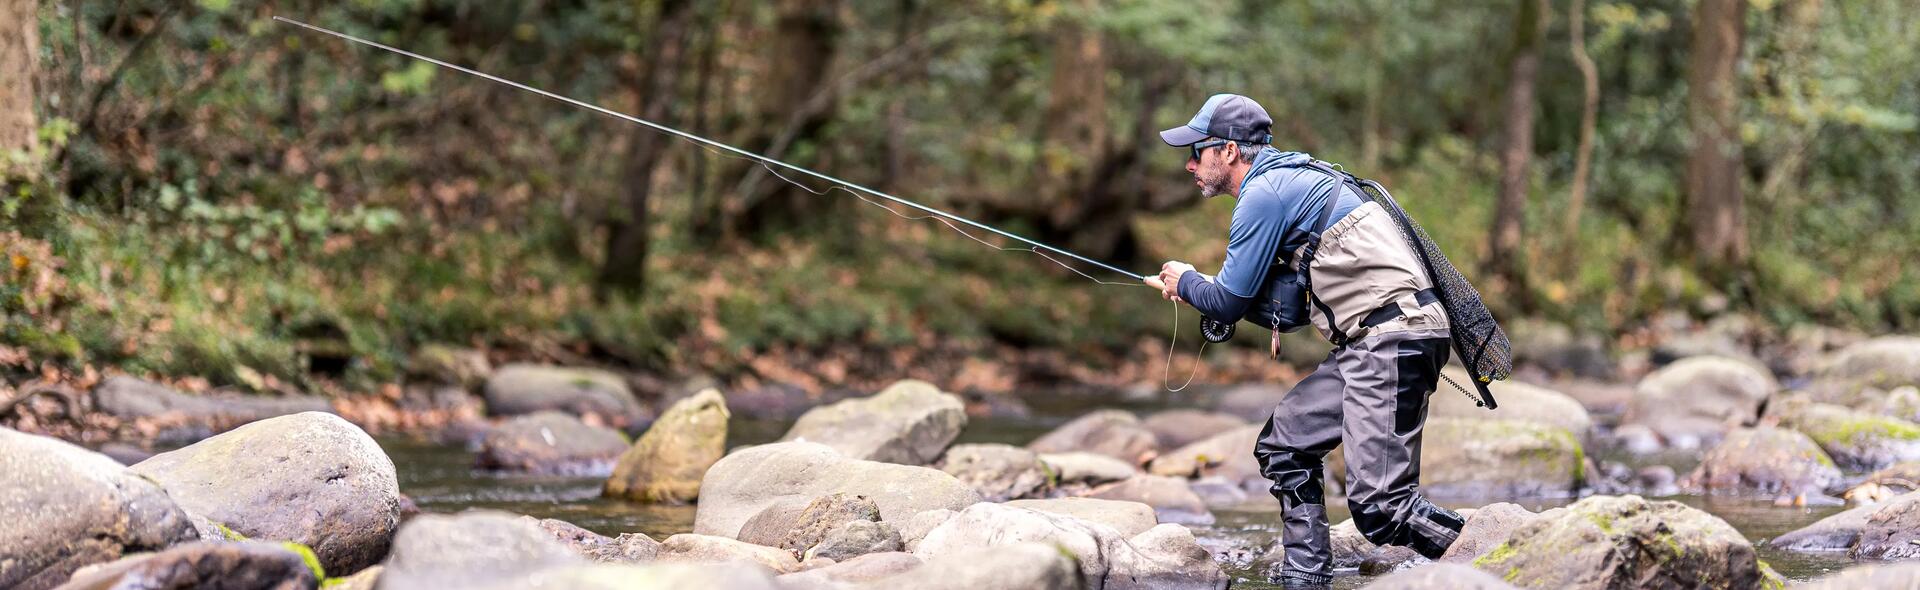 What Equipment Do You Need to Start Out Trout Fishing?